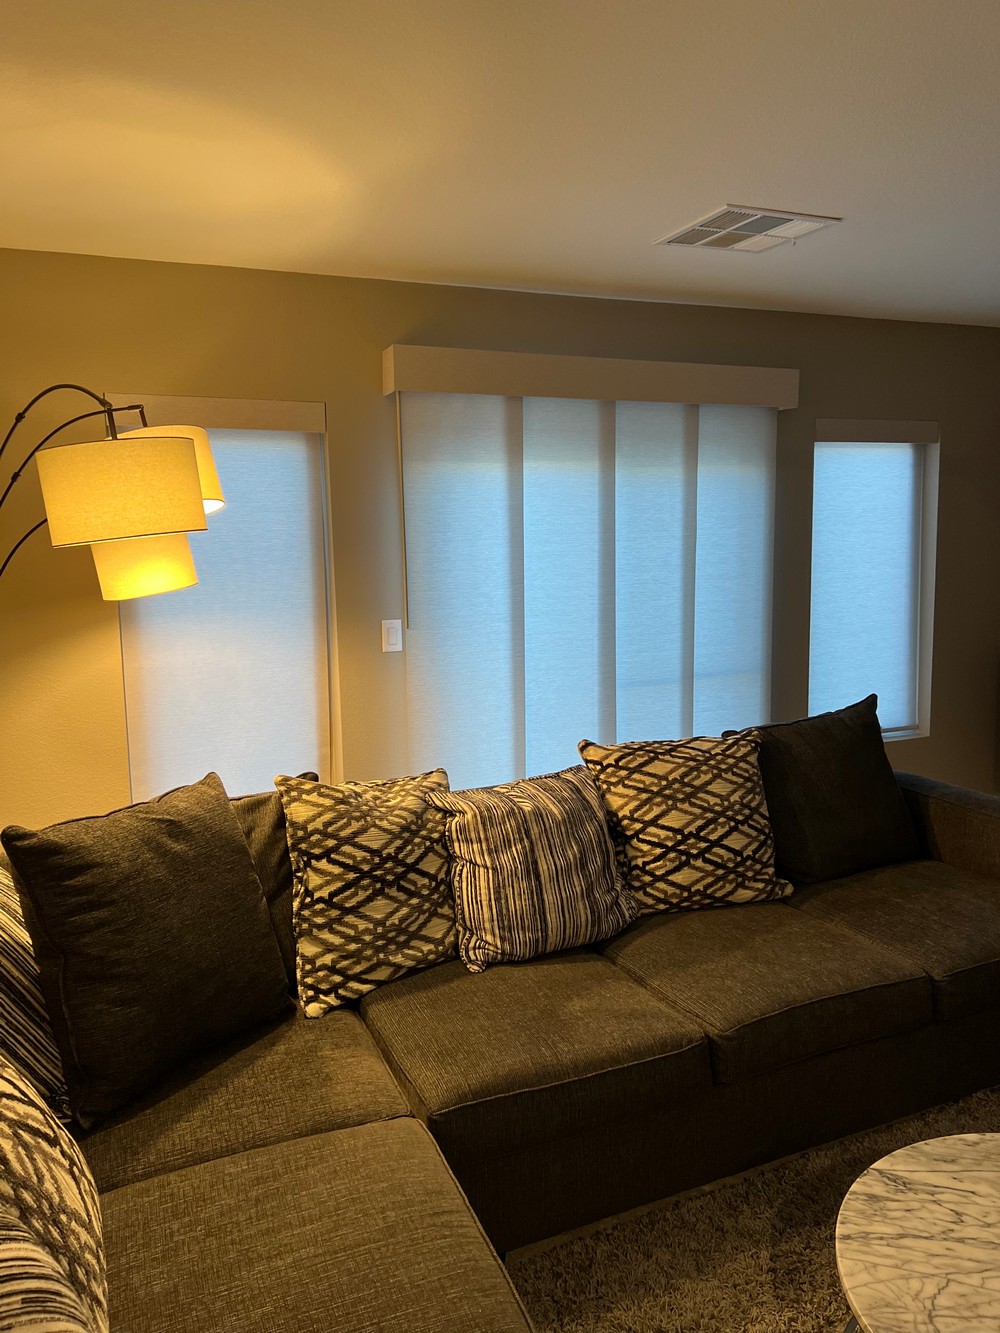 Cord Free Roller Shades with a Panel Track on Eaton Hill St in Southwest Las Vegas, NV